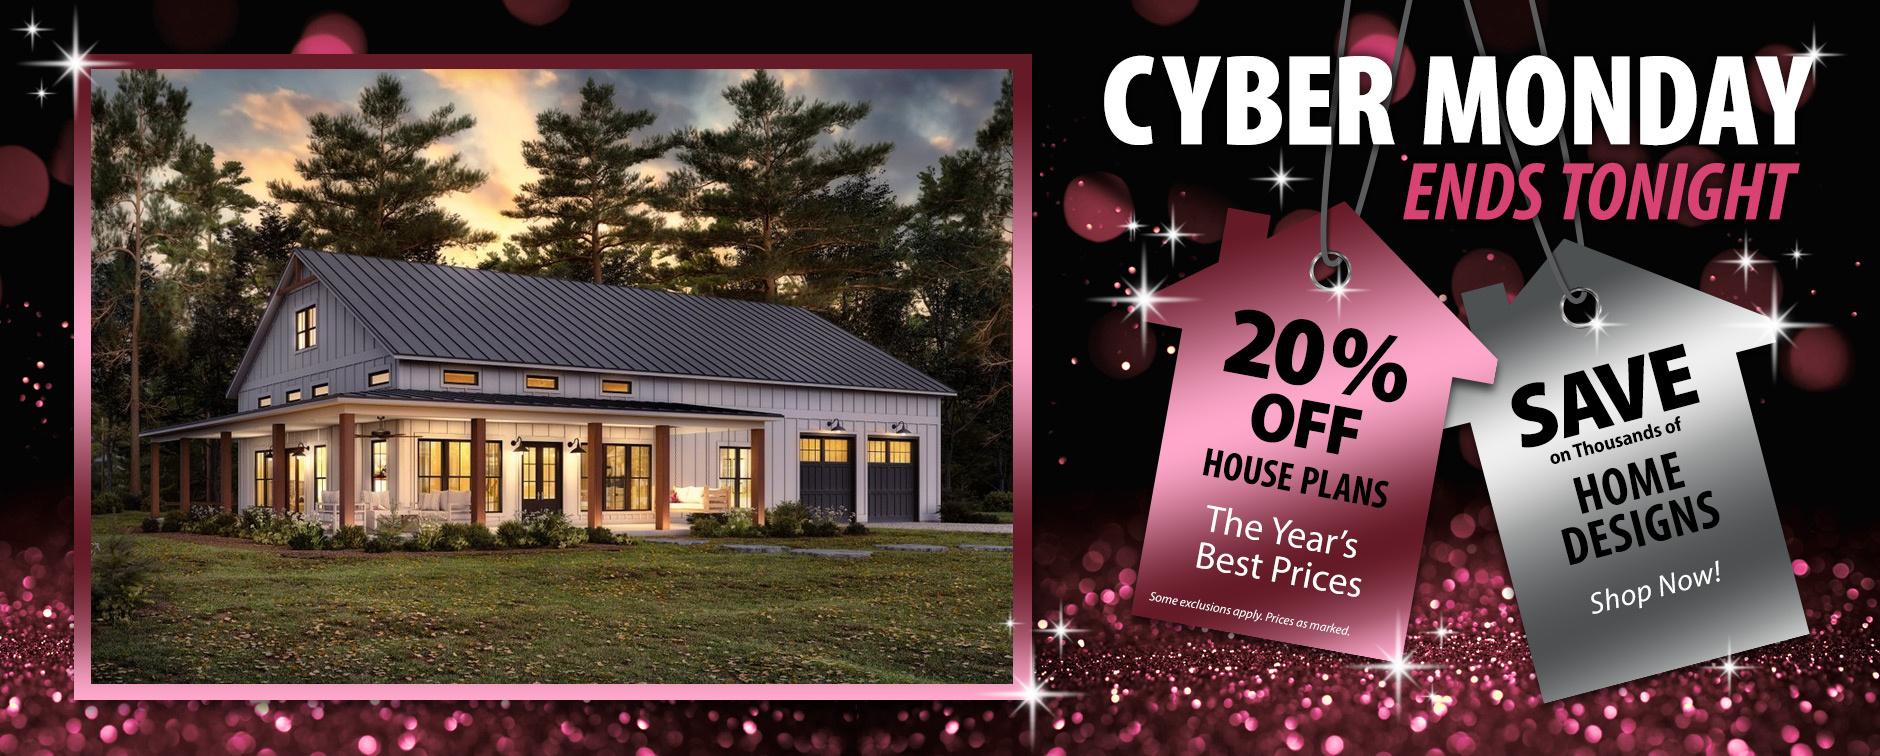 Cyber Monday Savings: Get 20% Off House Plans. Sale Ends Tonight.